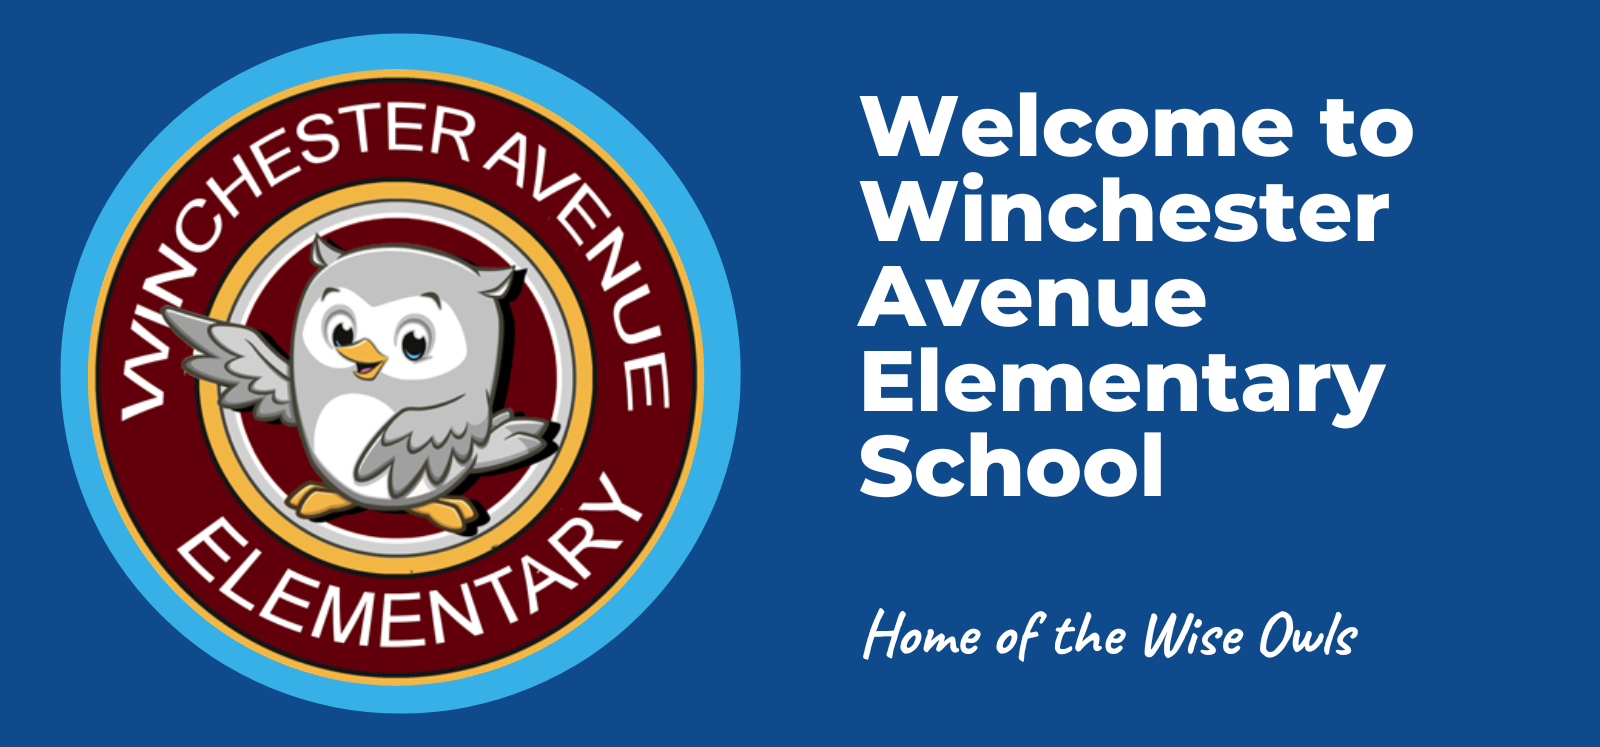 image of banner that says welcome to winchester avenue elementary school and home of the wise owls